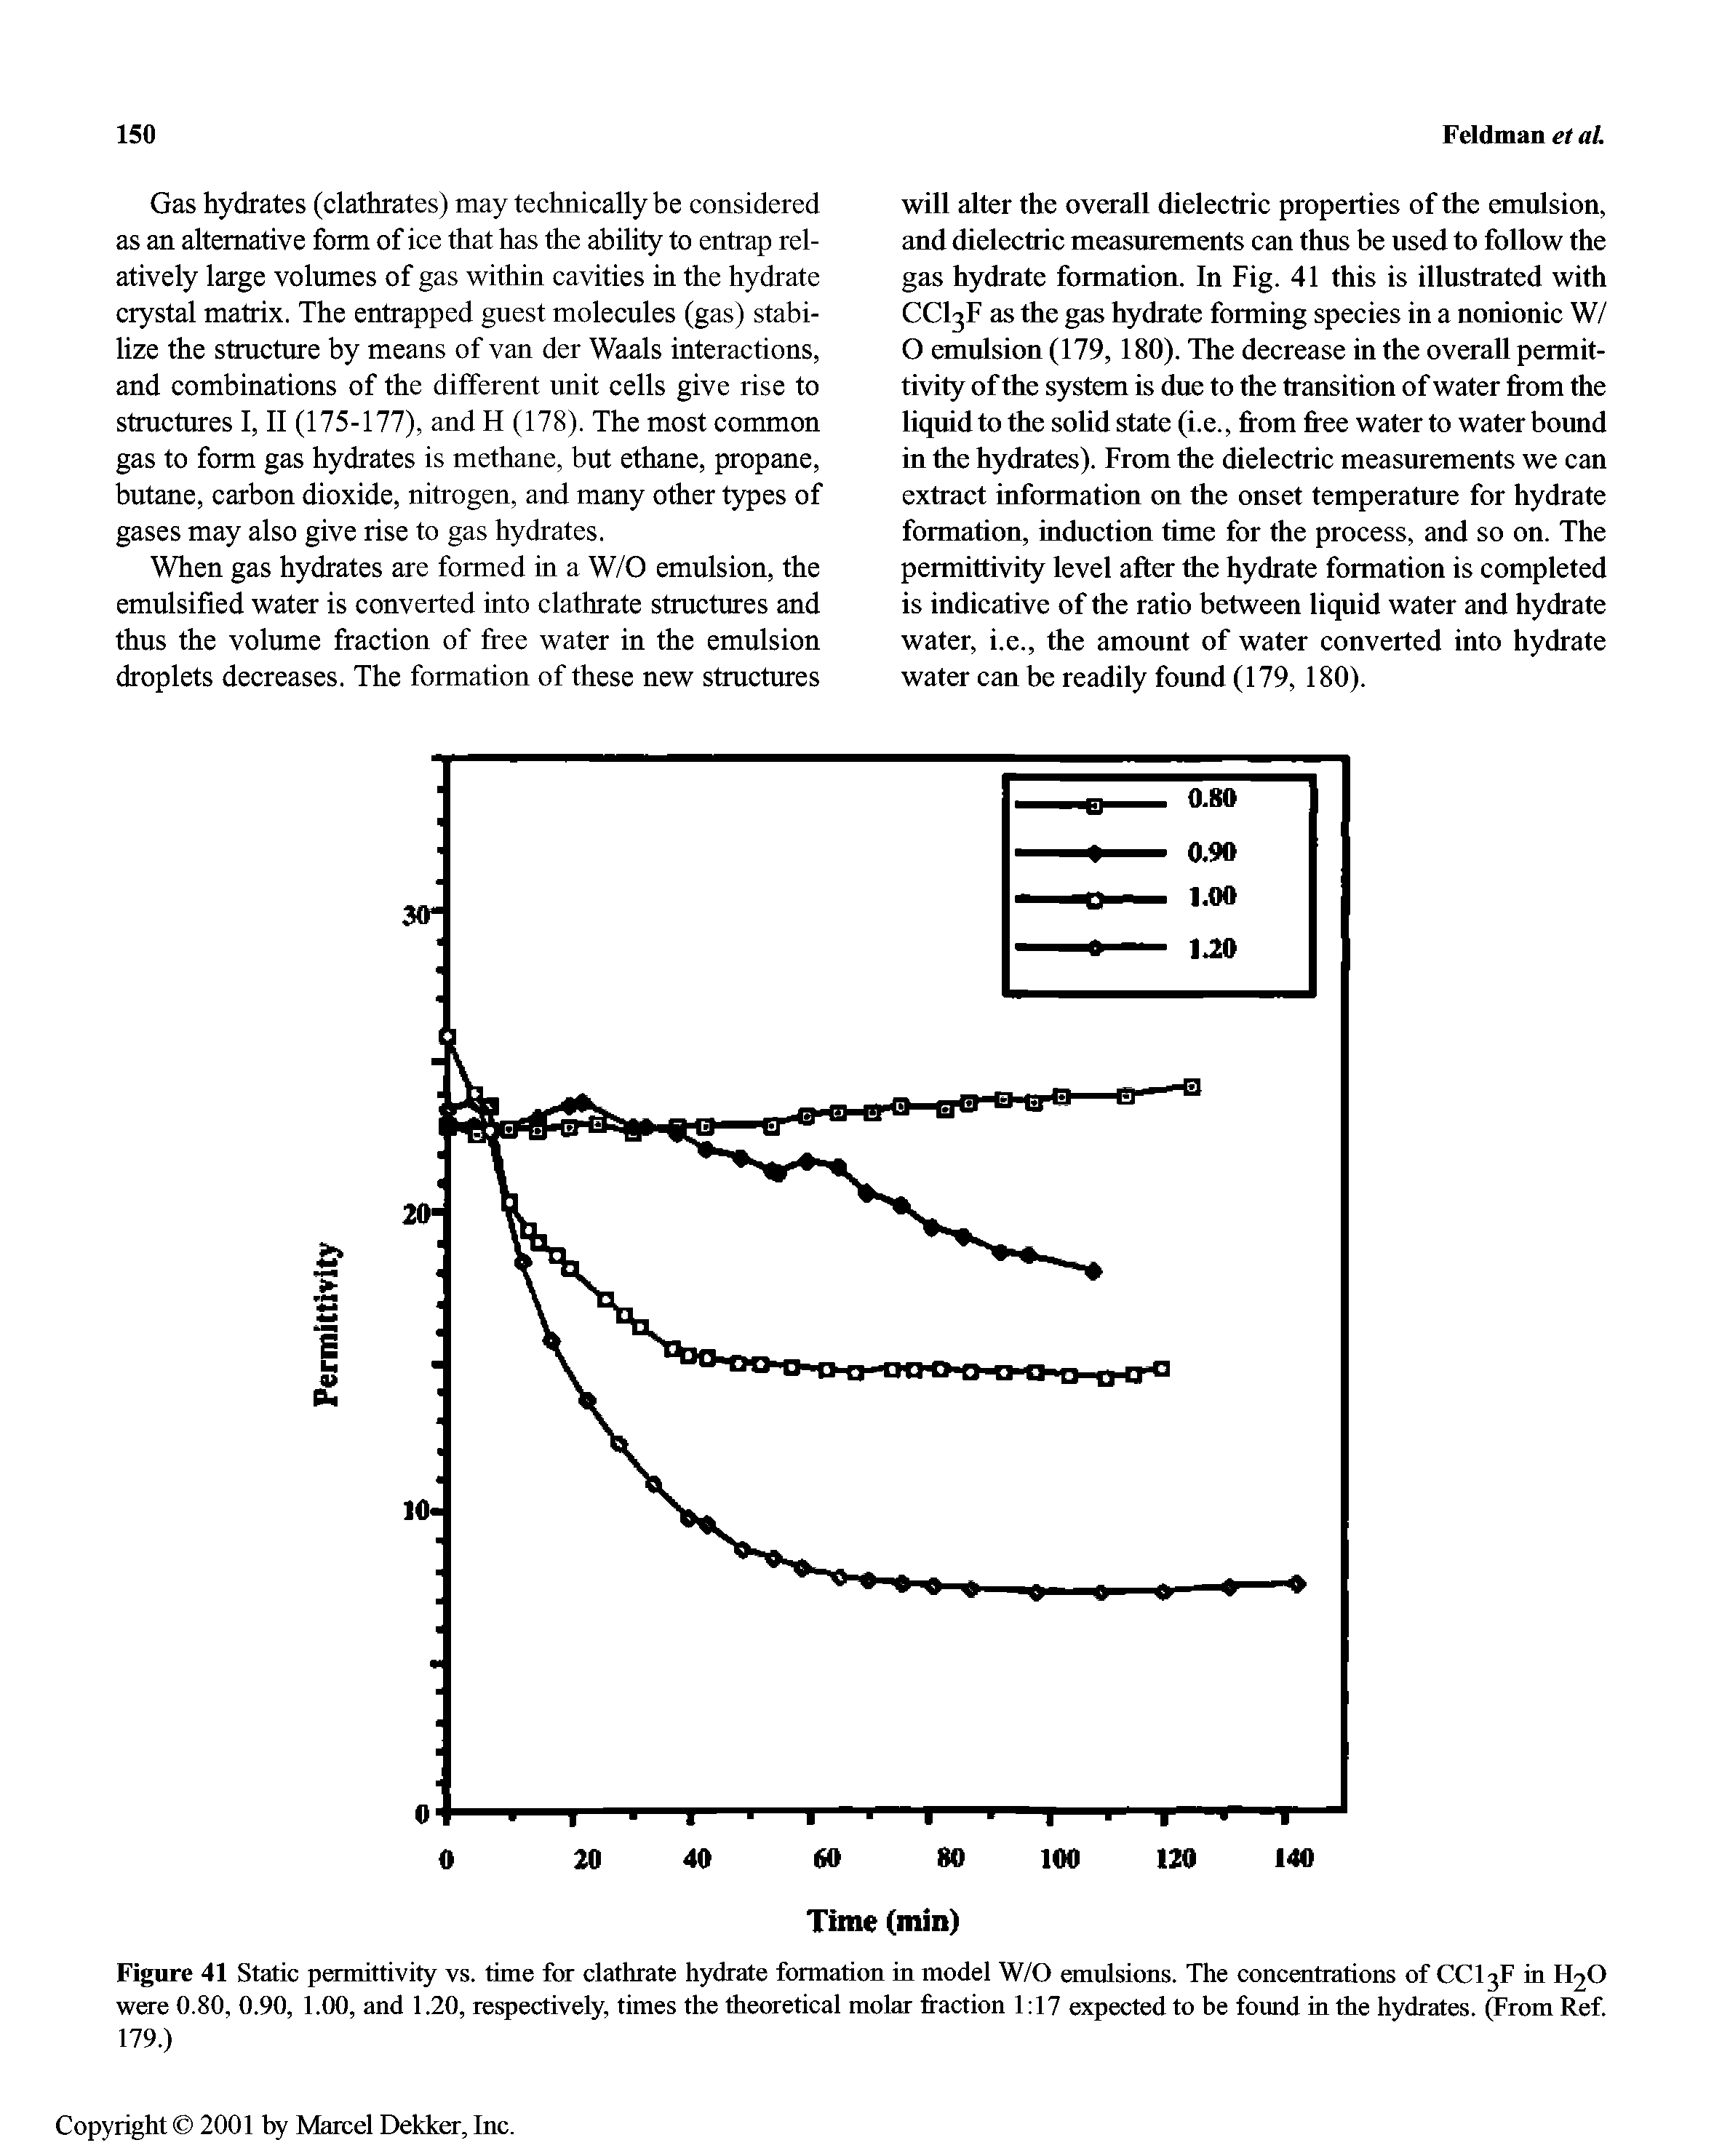 Figure 41 Static permittivity vs. time for clathrate hydrate formation in model W/O emulsions. The concentrations of CCI3F in H2O were 0.80, 0.90, 1.00, and 1.20, respectively, times the theoretical molar fraction 1 17 expected to be found in the hydrates. (From Ref. 179.)...